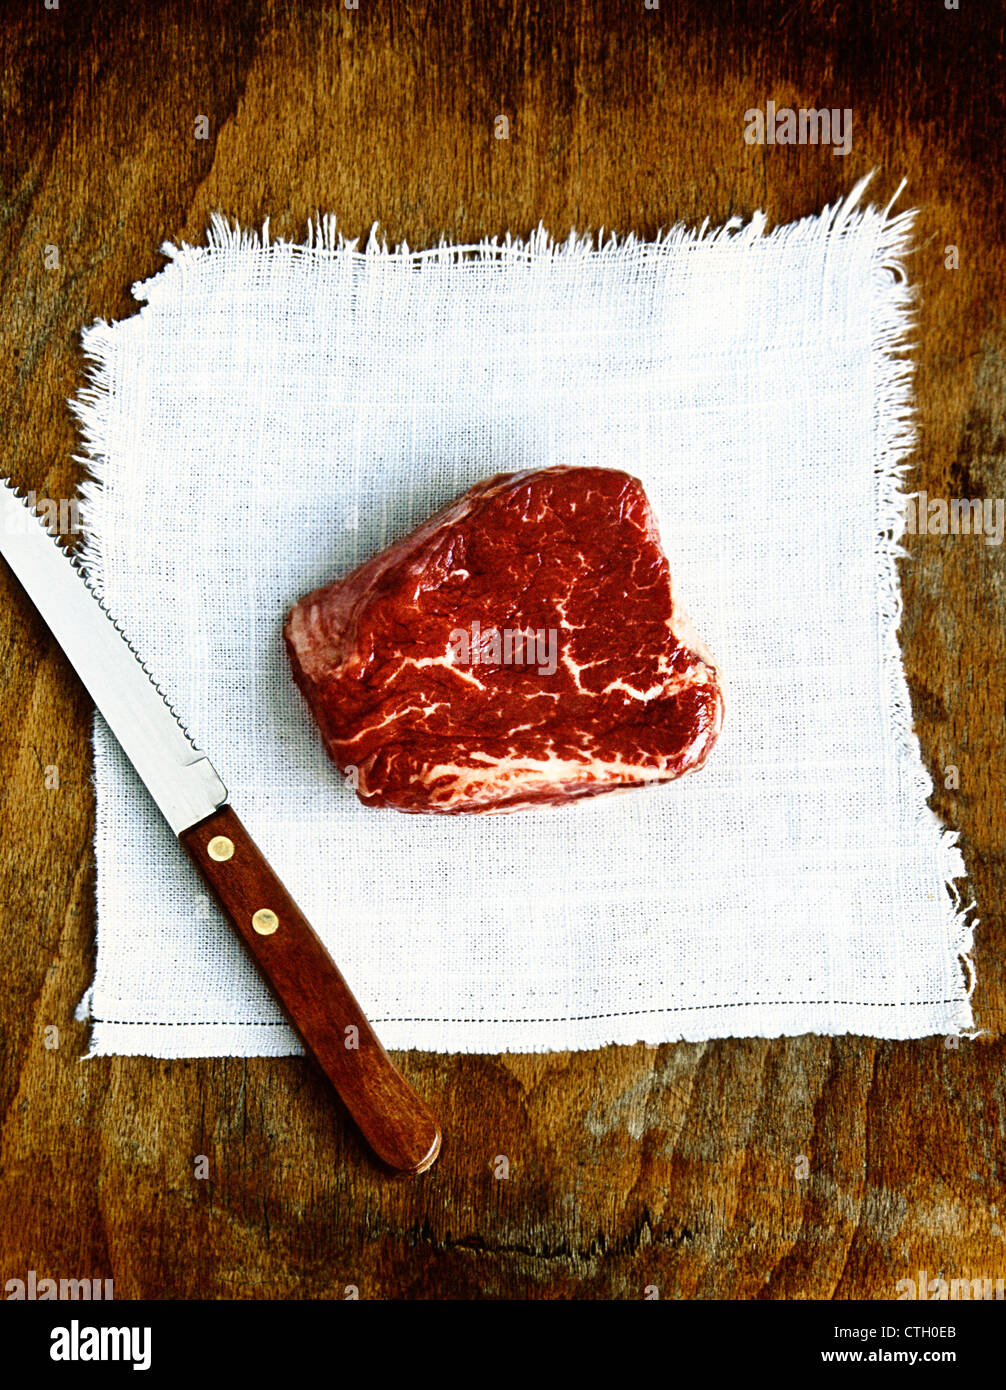 Raw beef and knife Stock Photo